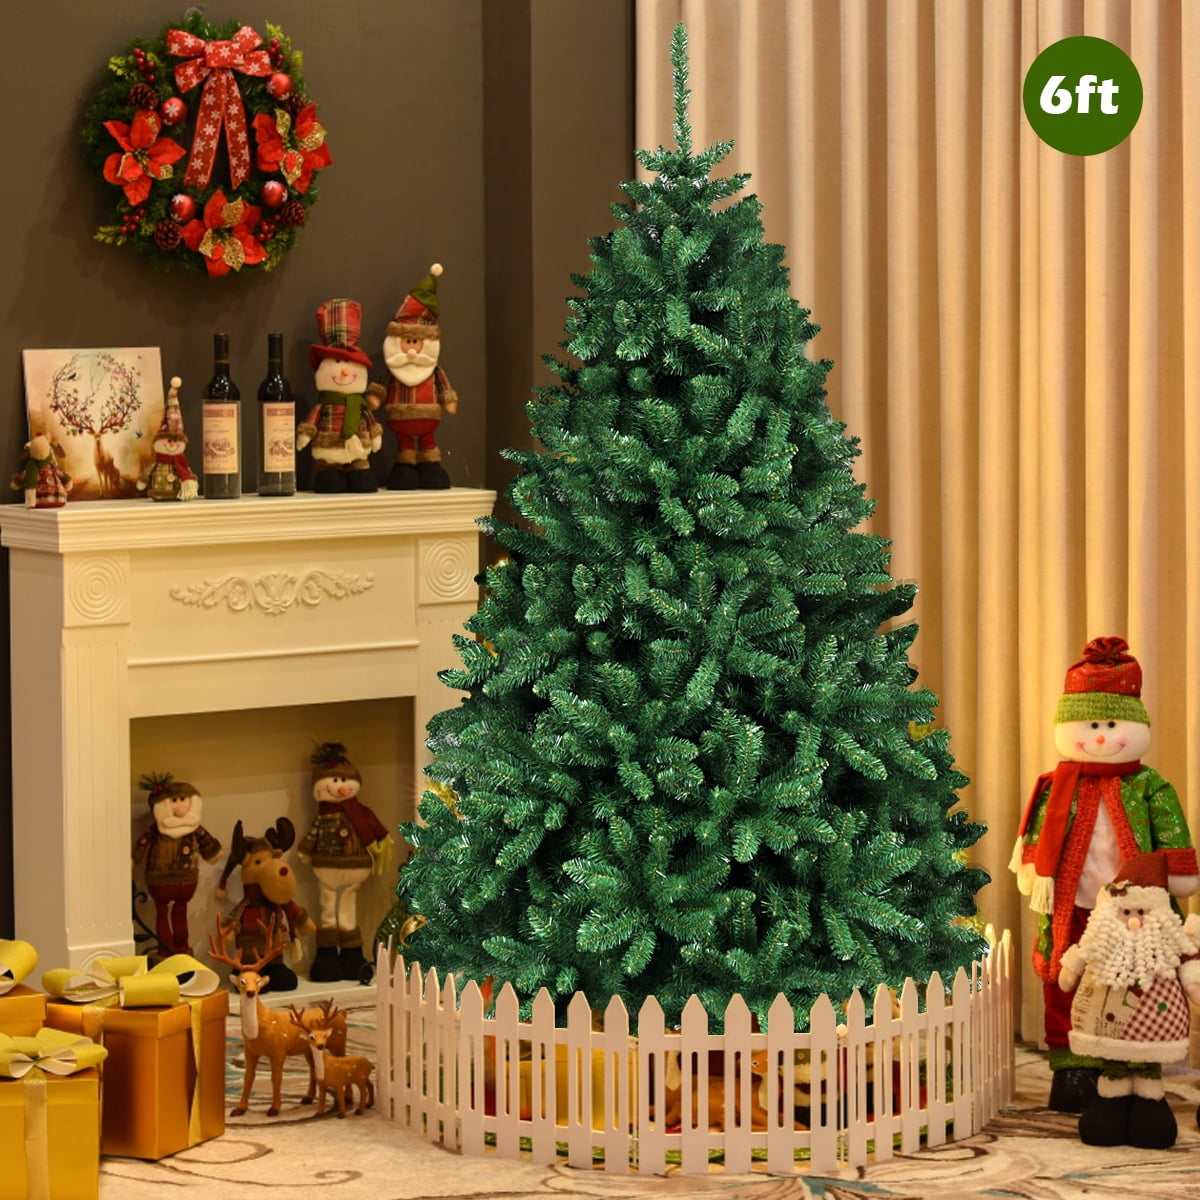 New Deluxe Green Christmas Decoration Tree 6ft 